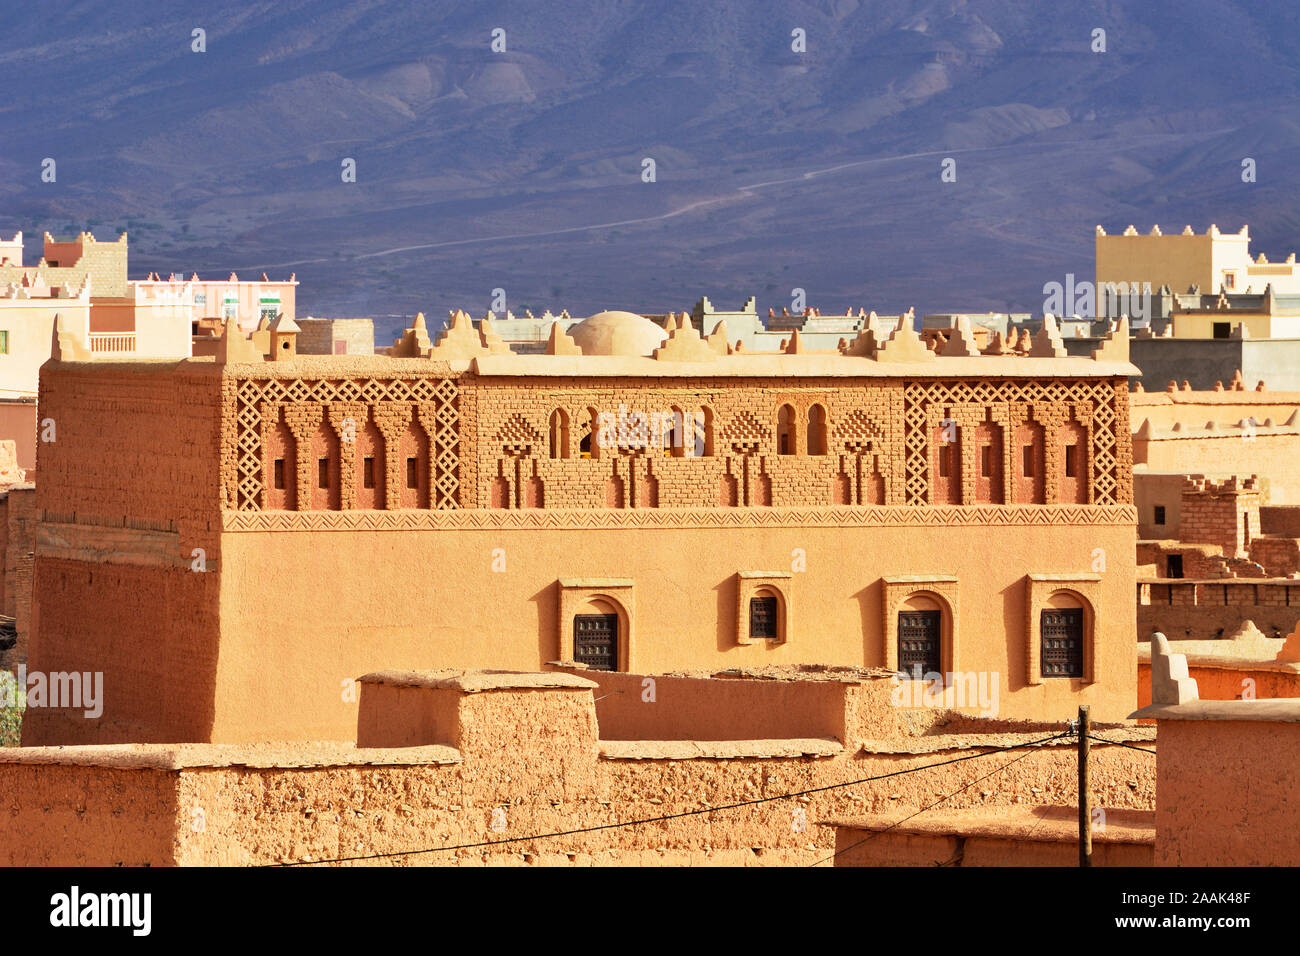 An old kasbah in Nkob. Morocco Stock Photo